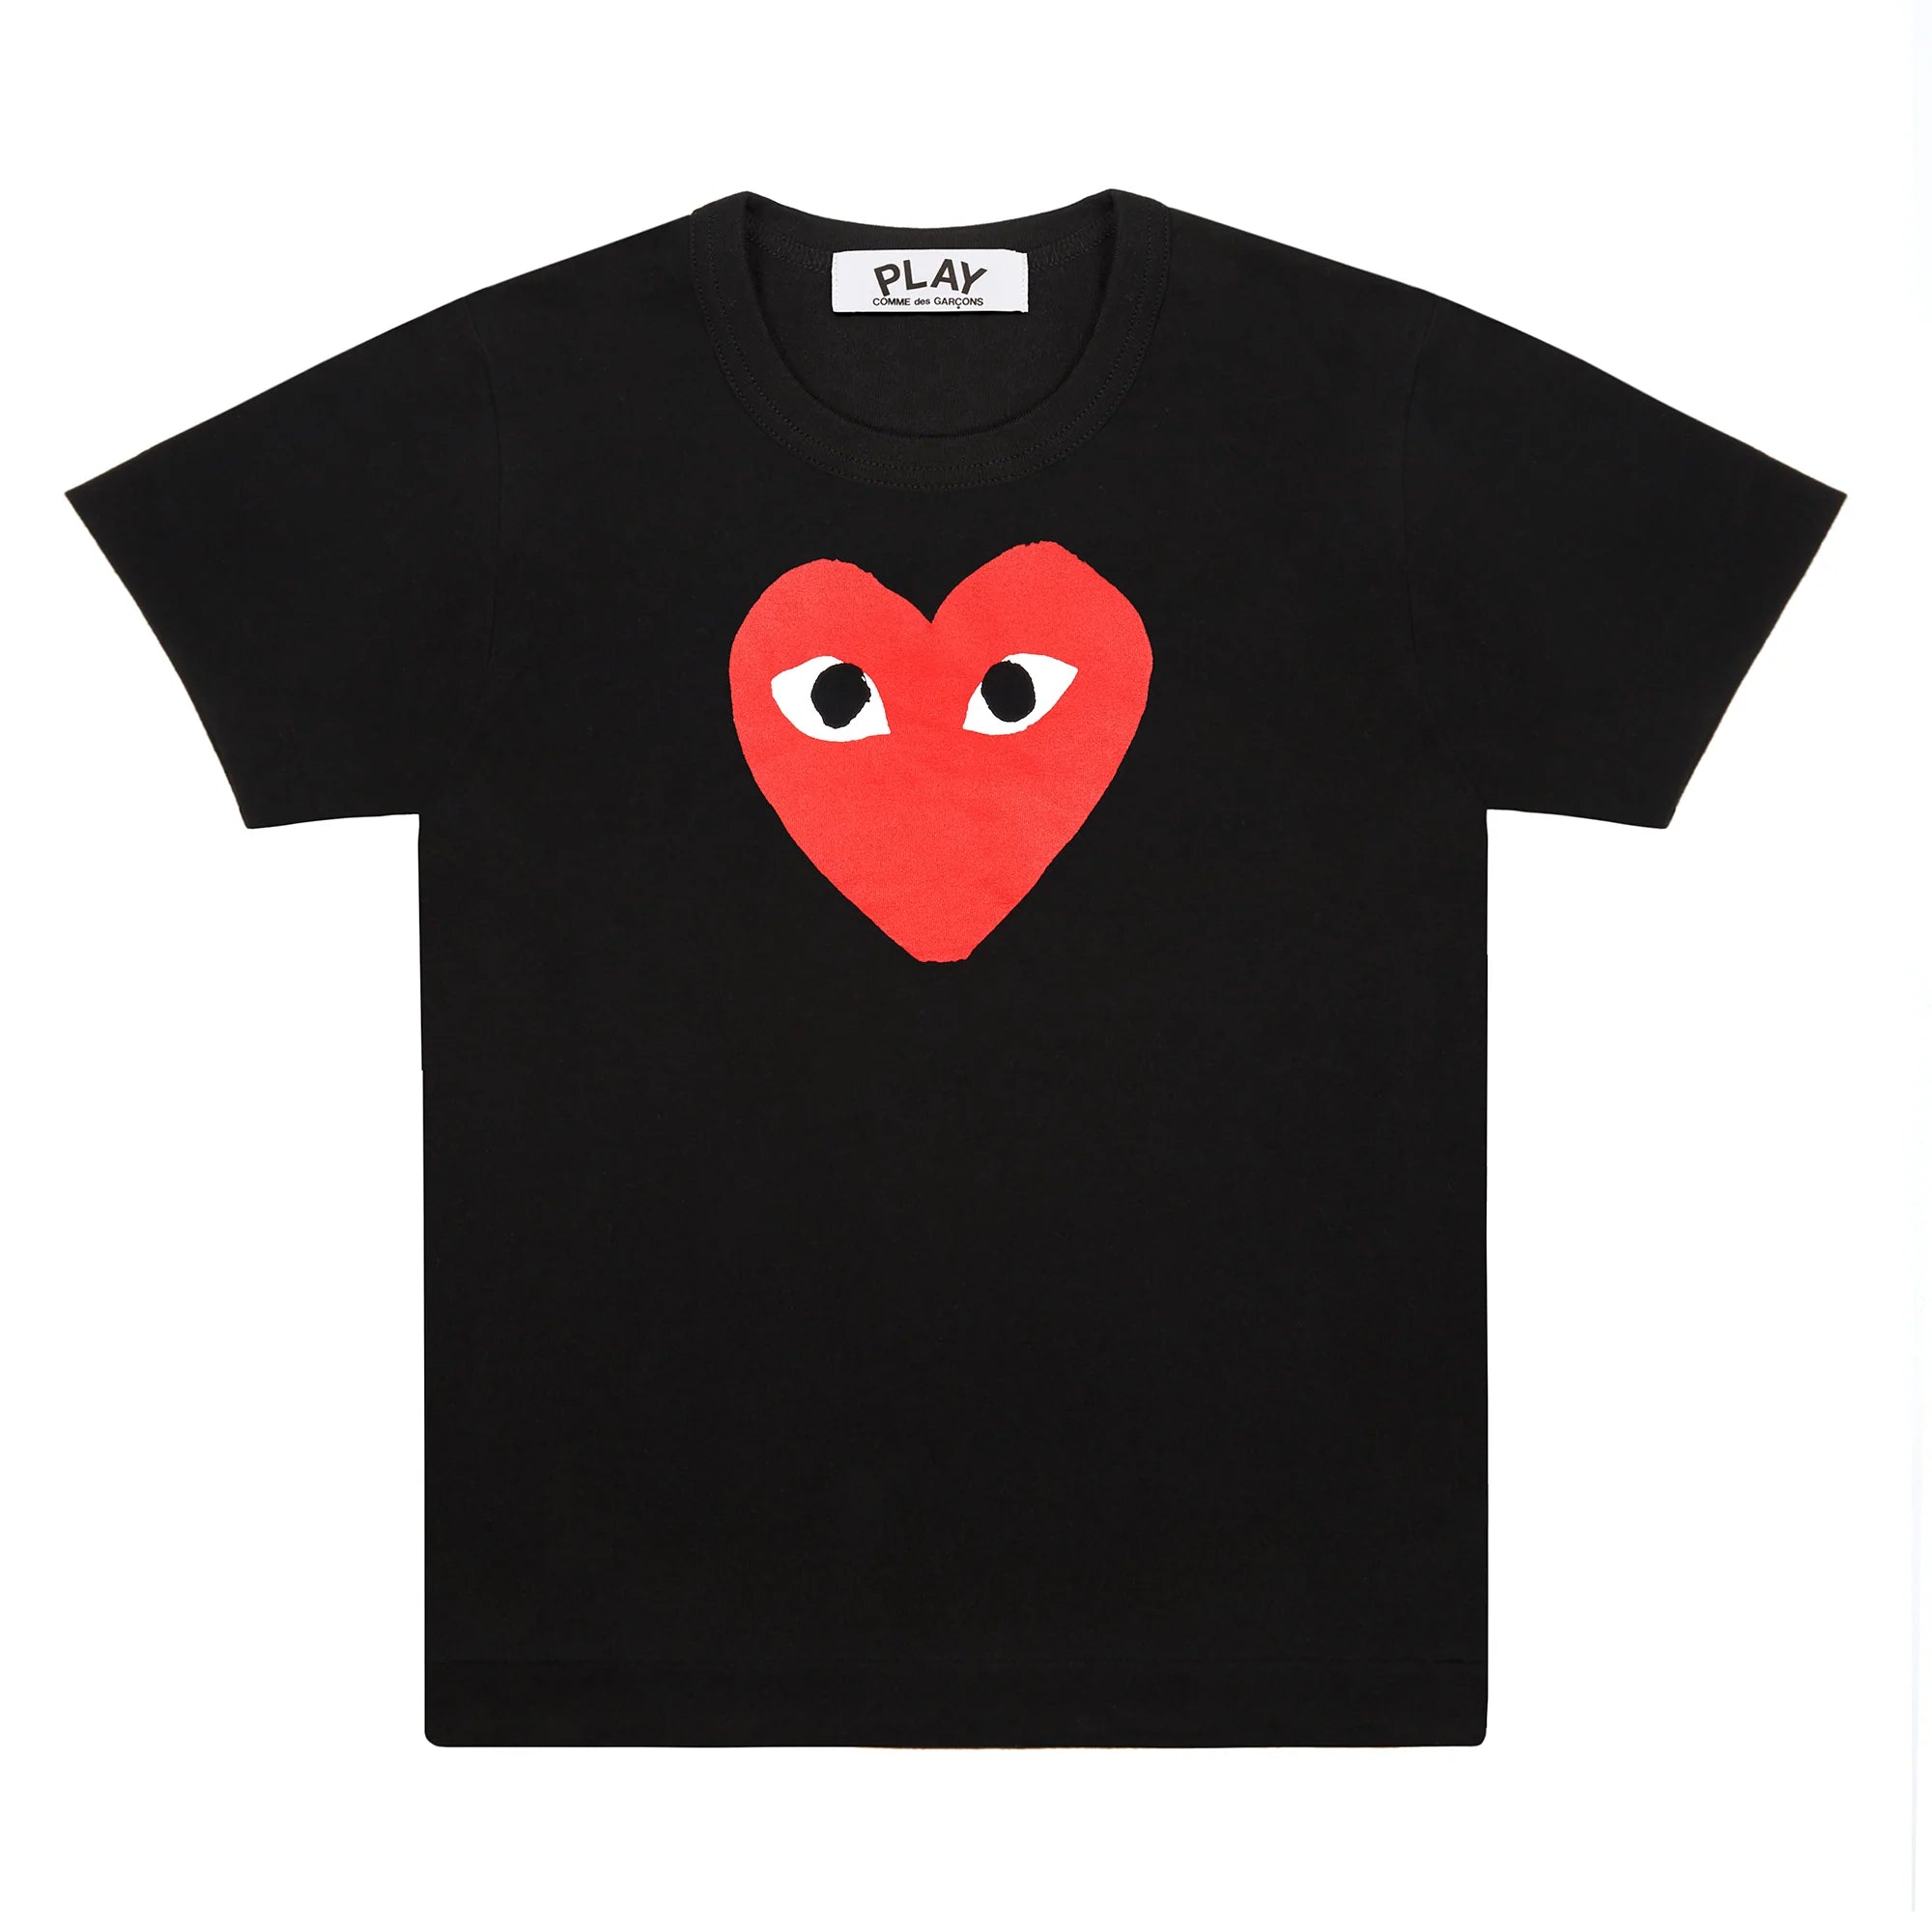 PLAY - Red T-Shirt - (T111)(T112)(Black) view 1